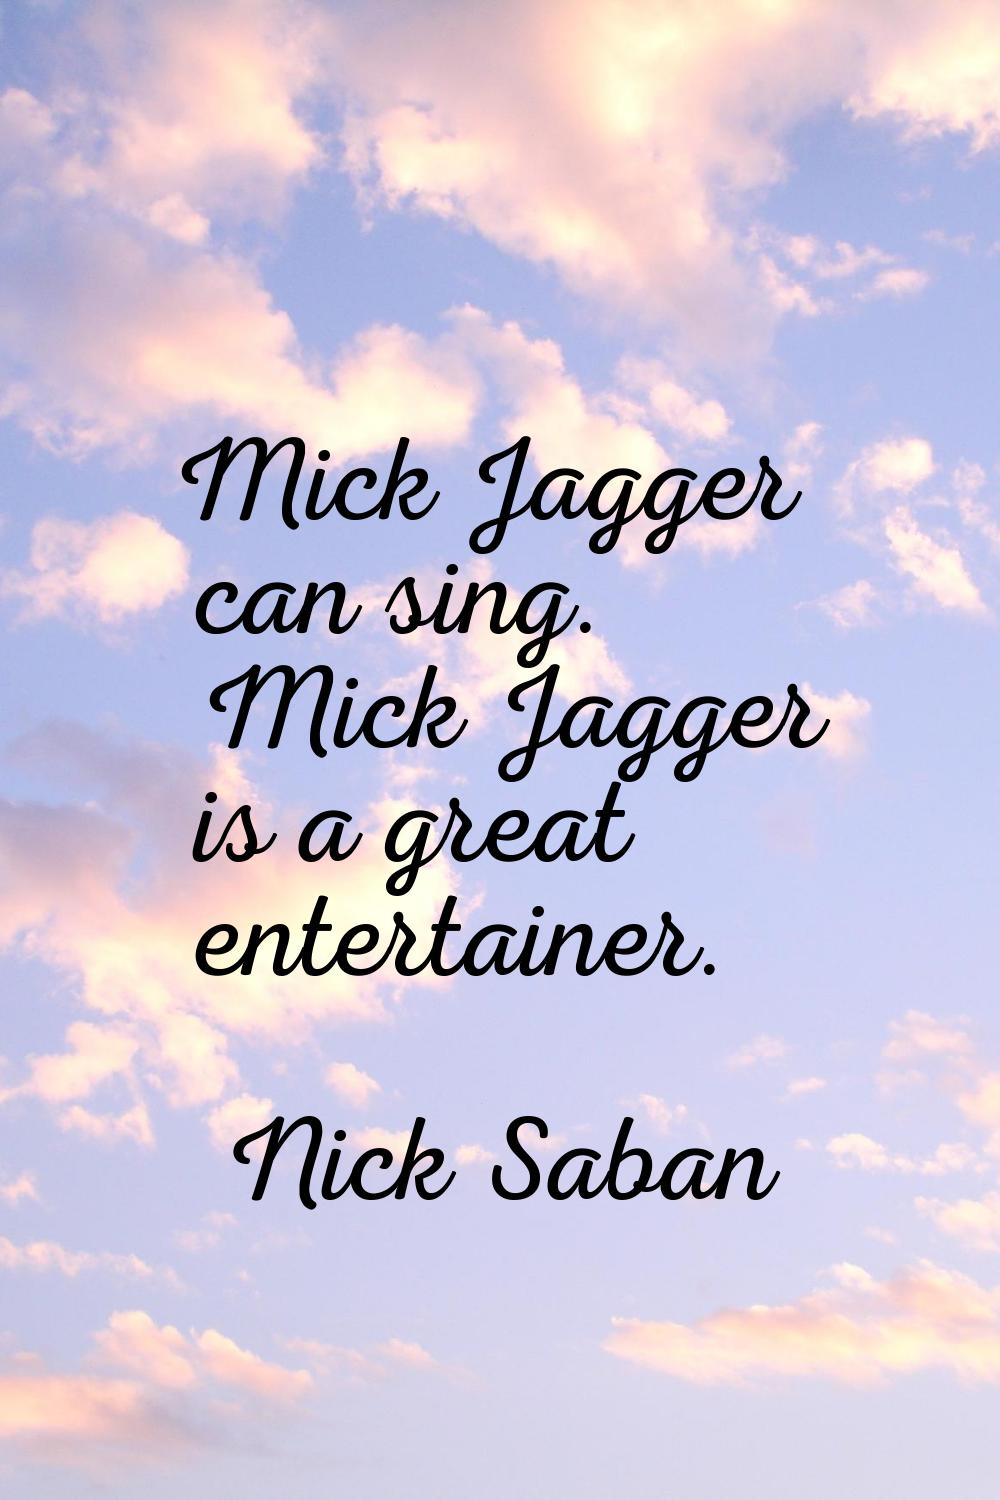 Mick Jagger can sing. Mick Jagger is a great entertainer.